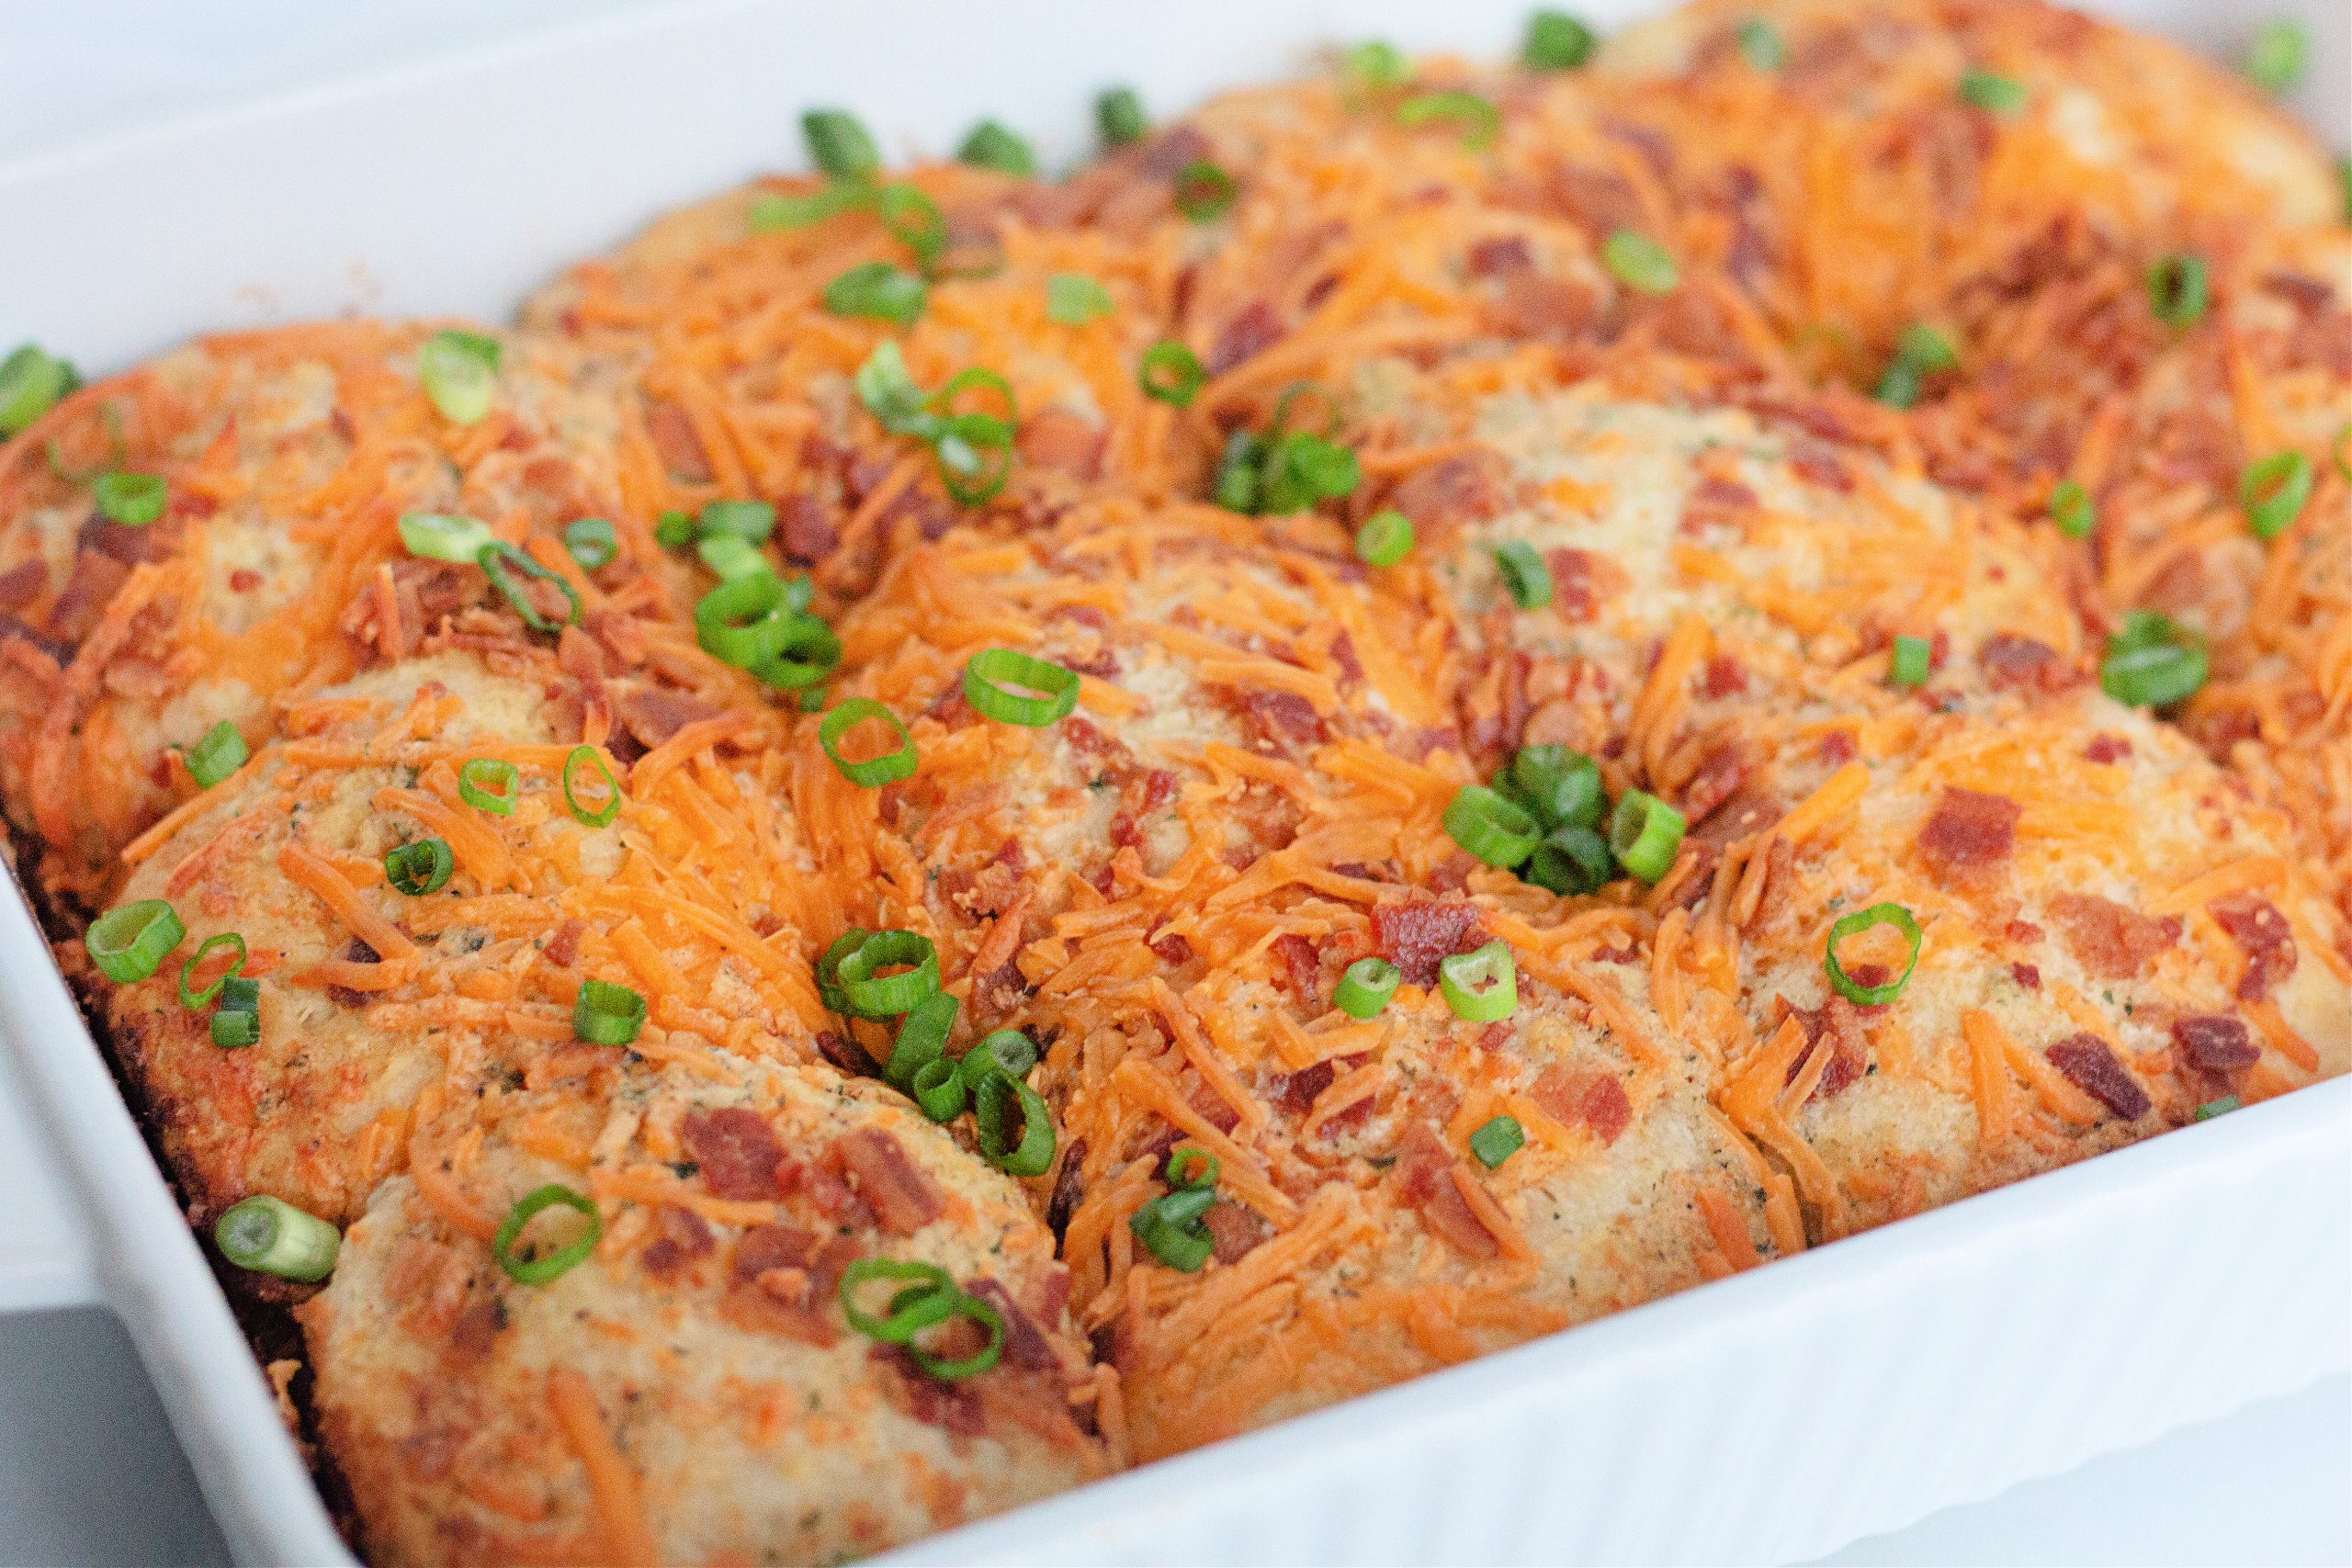 Baked biscuits topped with cheese, bacon, and green onions.